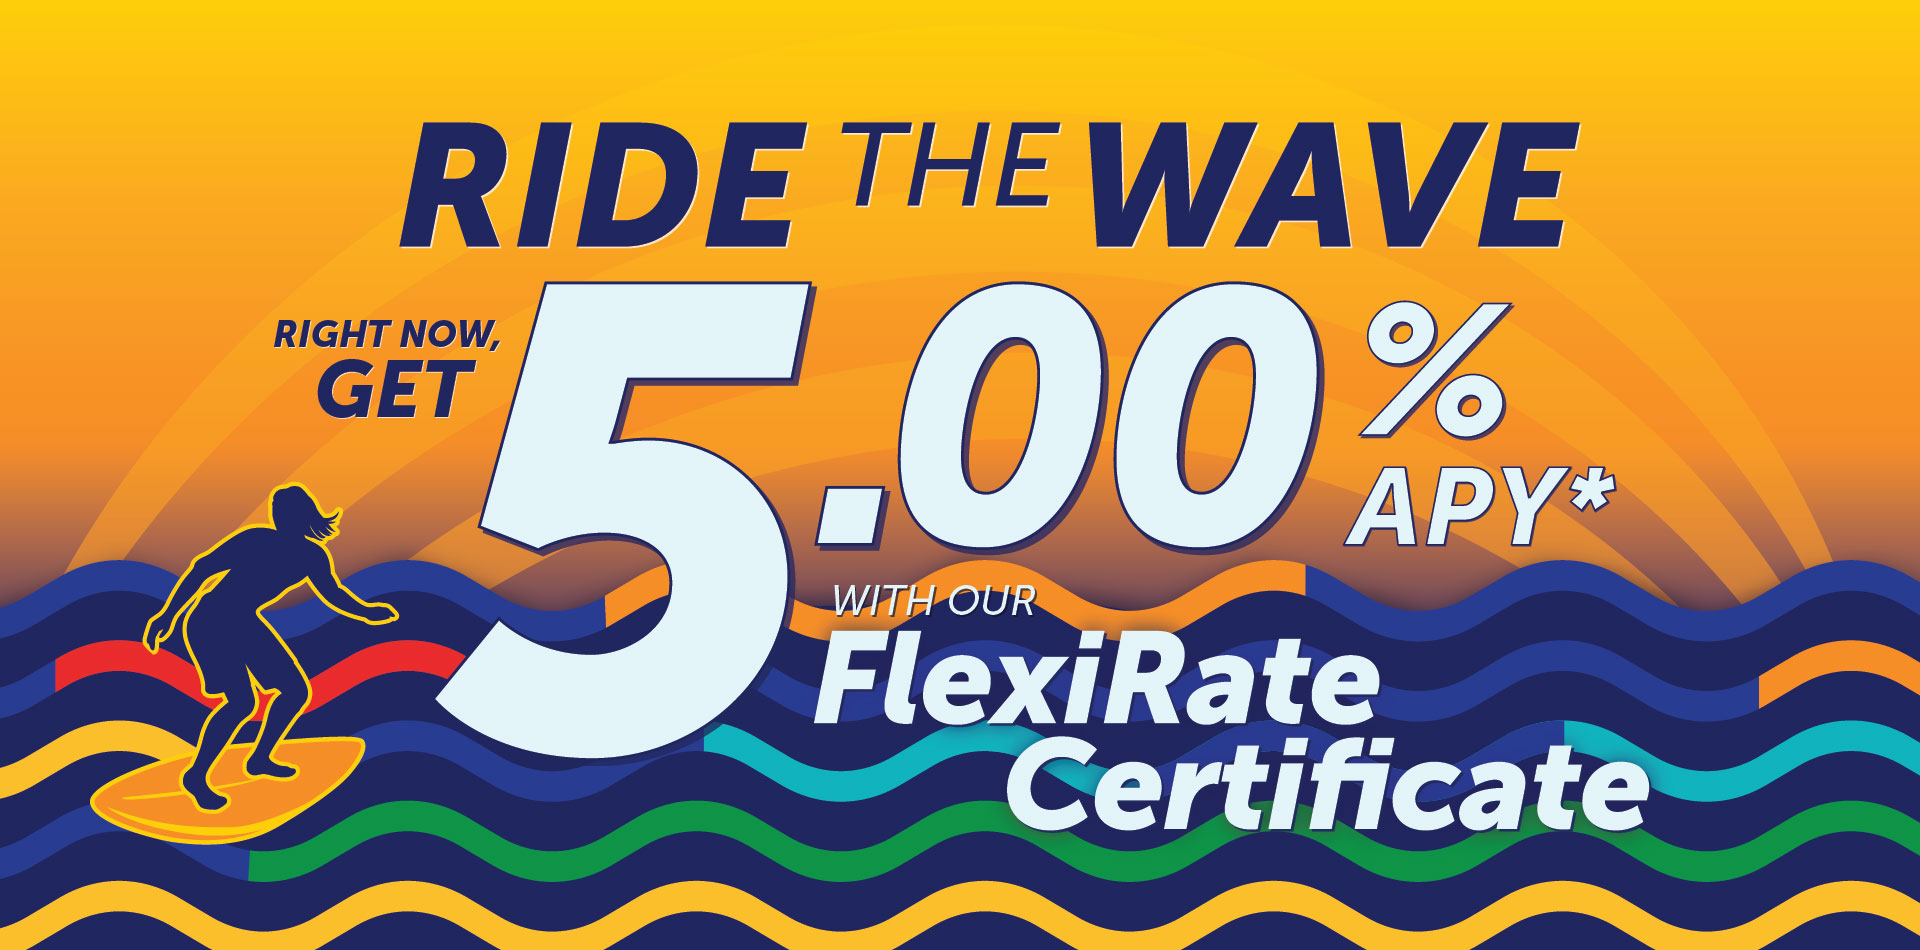 Right now get 5.00% APY with our FlexiRate Certificate!